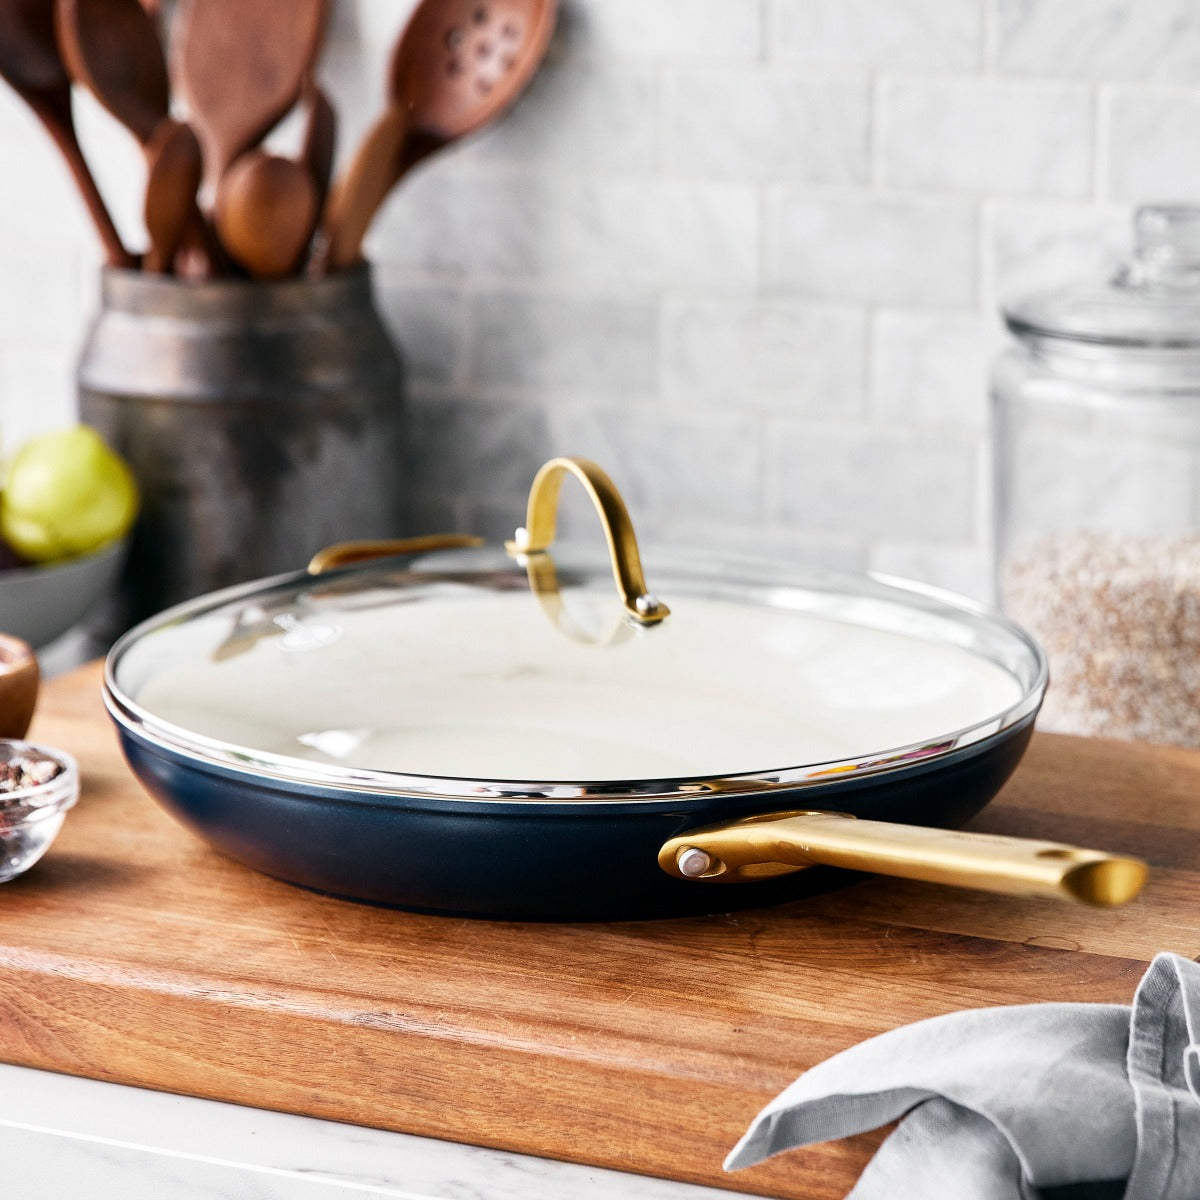 Reserve Ceramic Nonstick 12 Frypan with Helper Handle and Lid, Twili